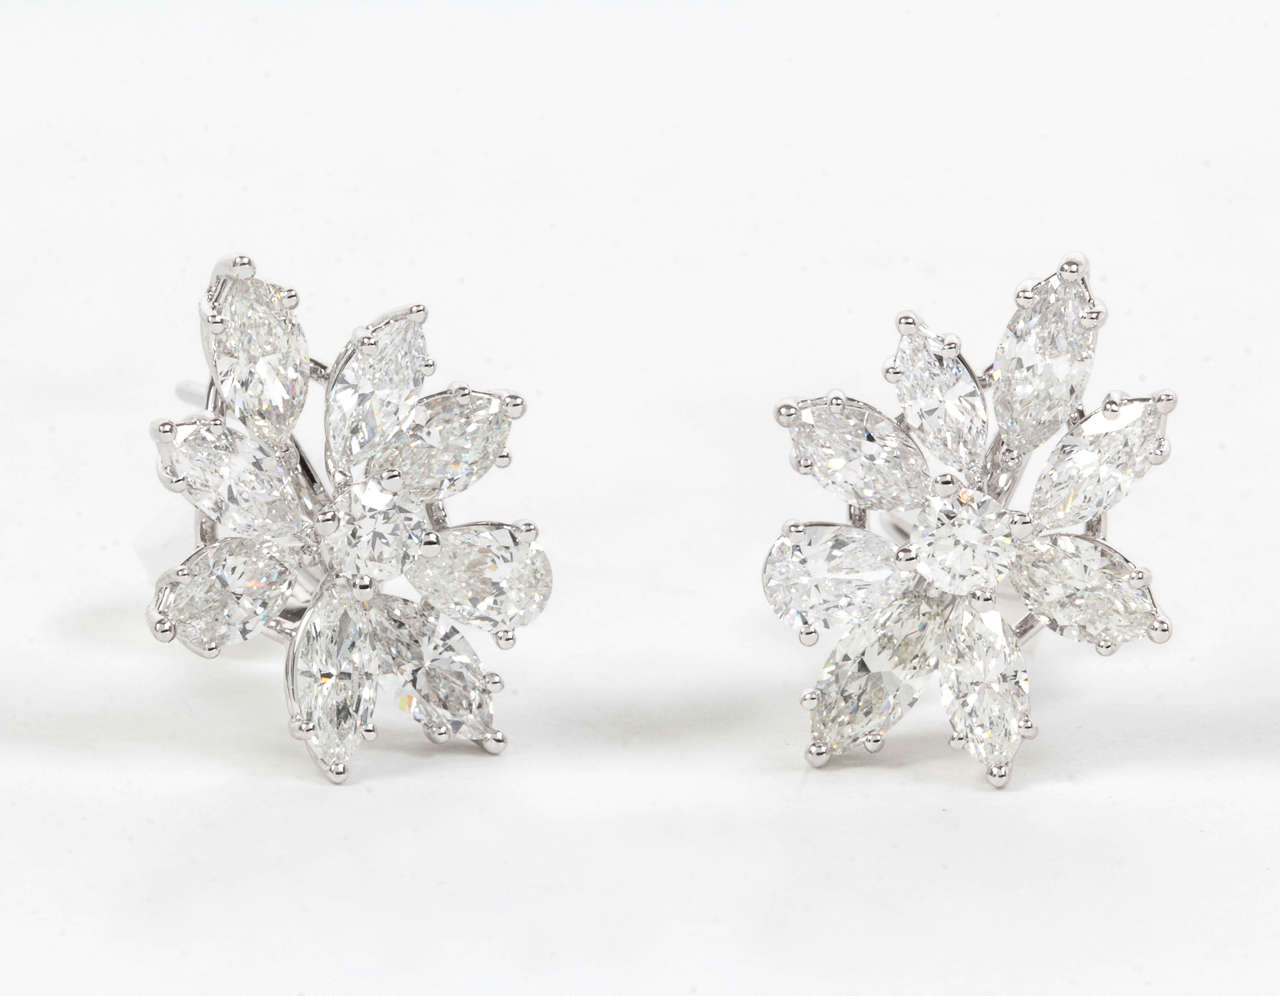 5.26 carats pear and marquise shaped diamonds set in 18k white gold.

Please email us for more information on this exquisite pair of earrings.